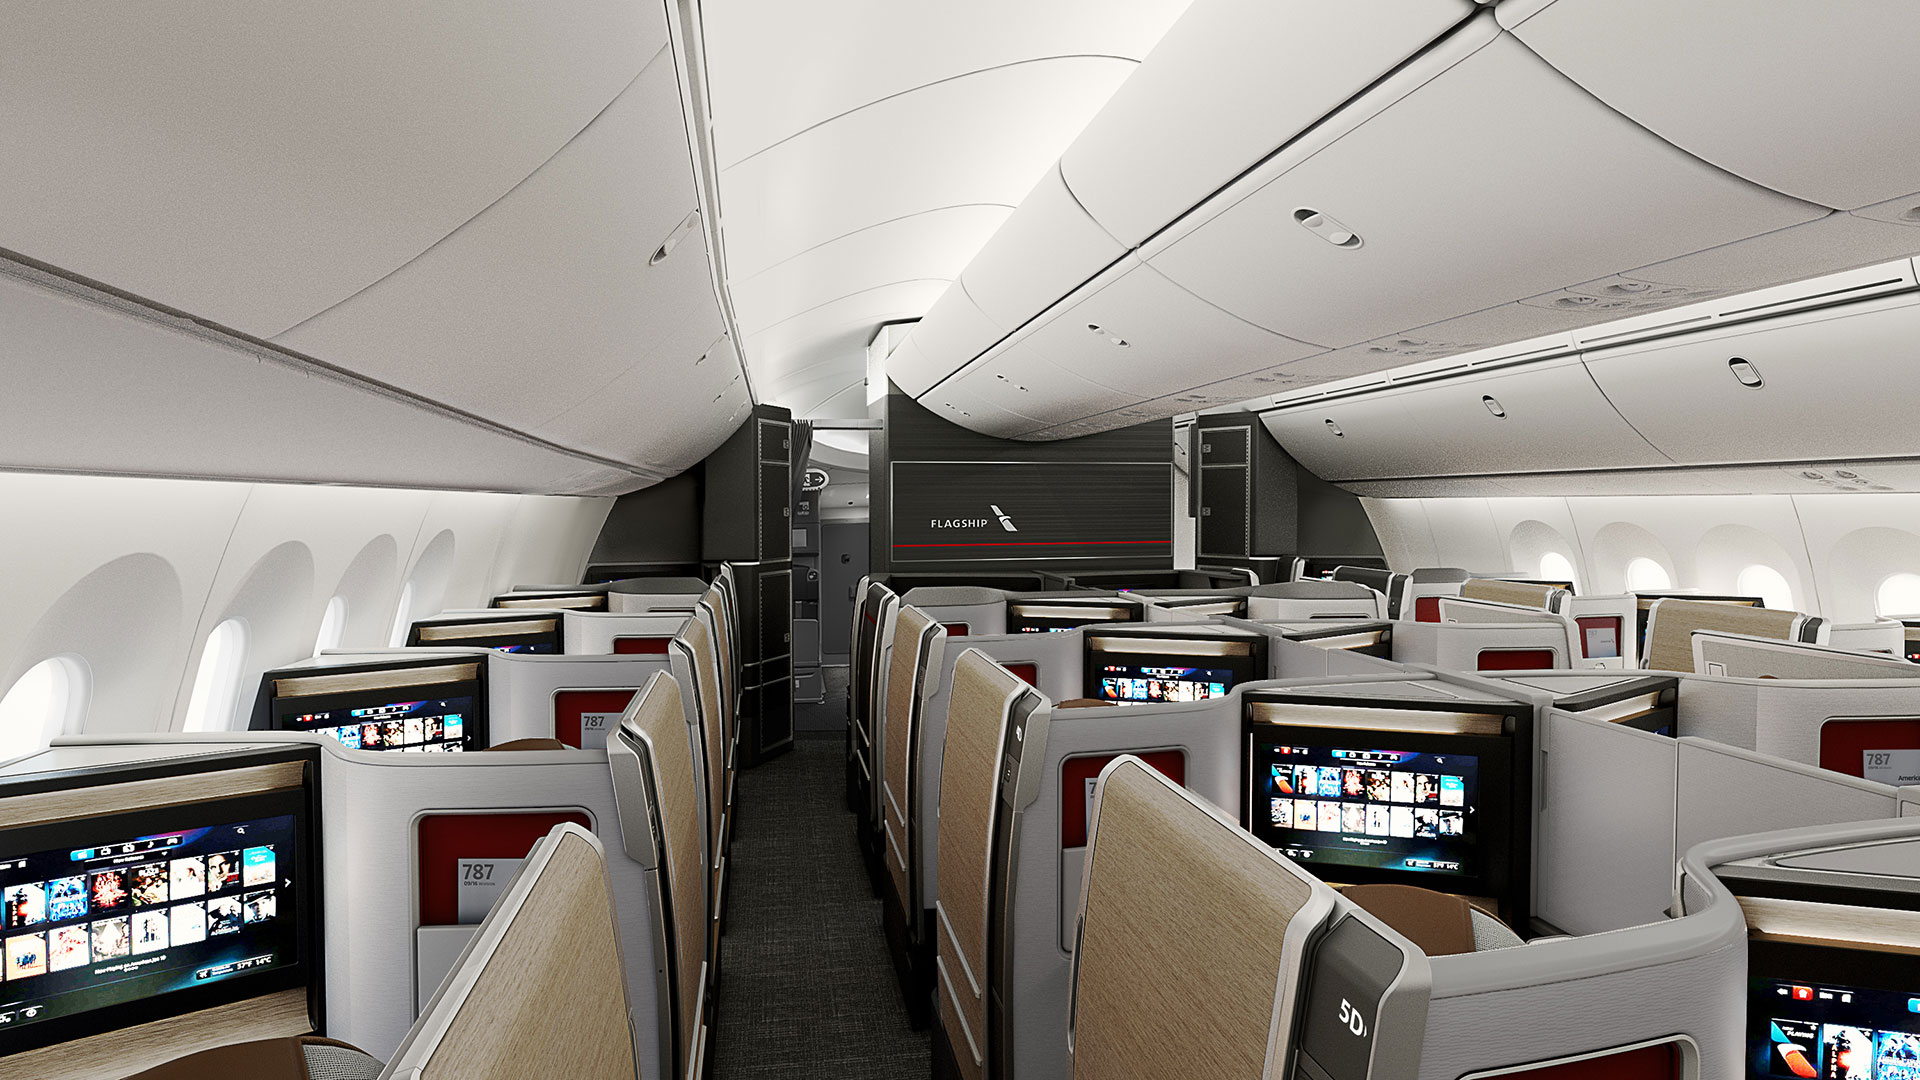 The boeing 787-9 will have 51 flagship suite seats, 21 more than the current boeing 787-9 in american's fleet.